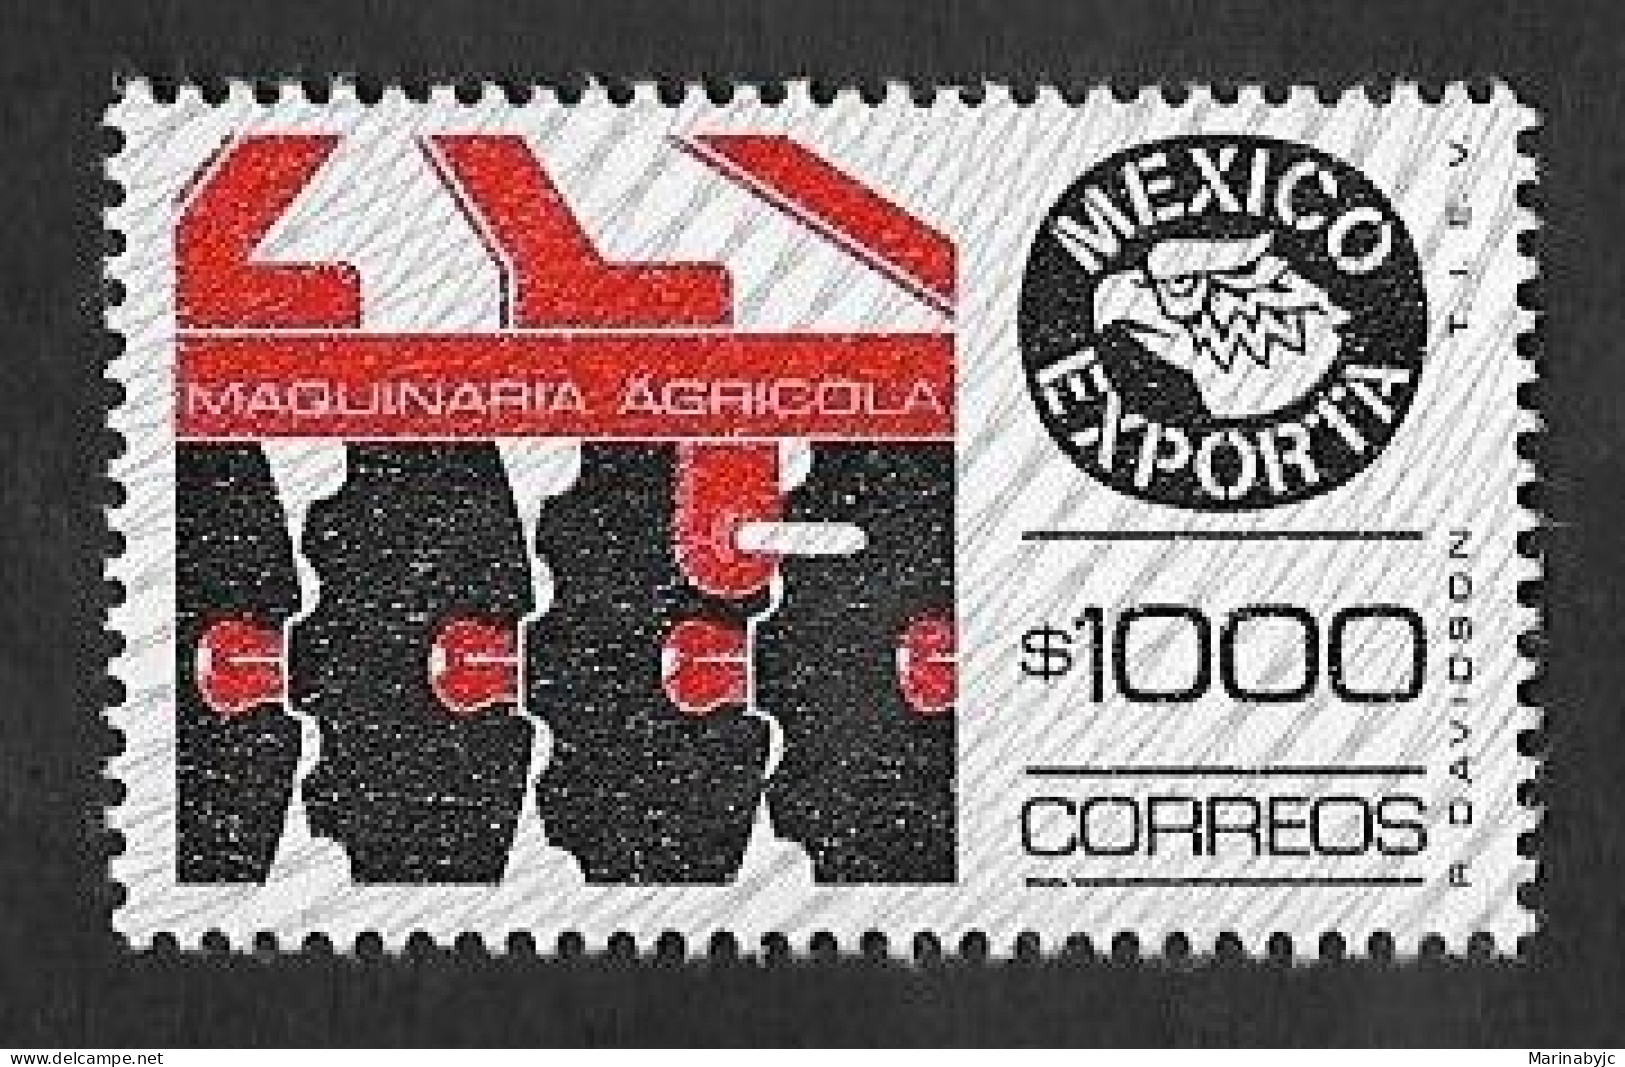 SD)1975 MEXICO  FROM THE MEXICO EXPORT SERIES, AGRICULTURAL MACHINERY 1000P SCT 1501 WMK. 300, WITH WEFT, MNH - Mexico